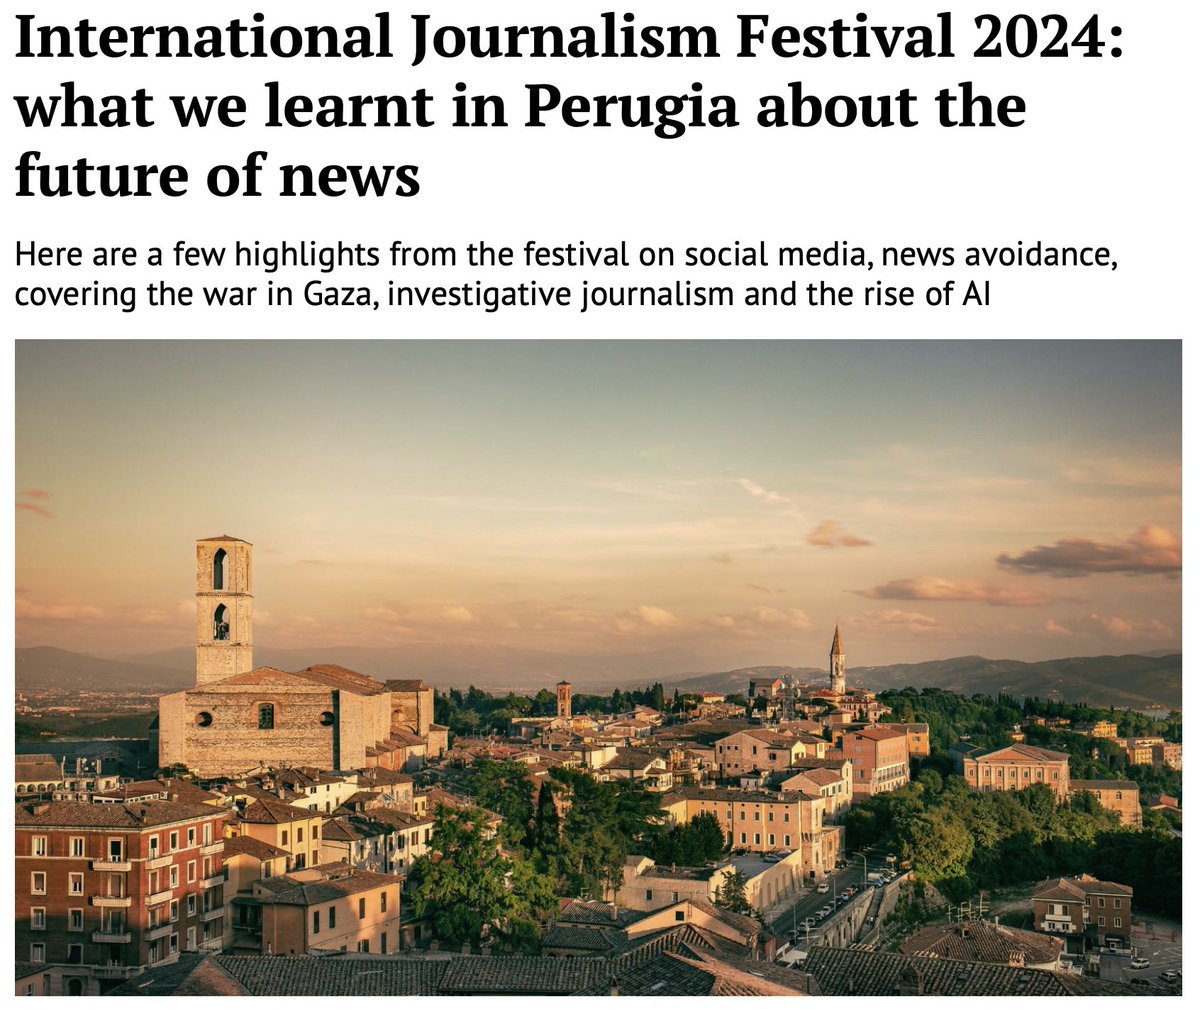 .@risj_oxford wrote a fantastic review of the @journalismfest for those of us who could not attend it in person this year. Here are some of the take-aways that got my attention: ☑️AI regulations are likely to stifle press freedom even to a higher degree.Governments may use AI to…